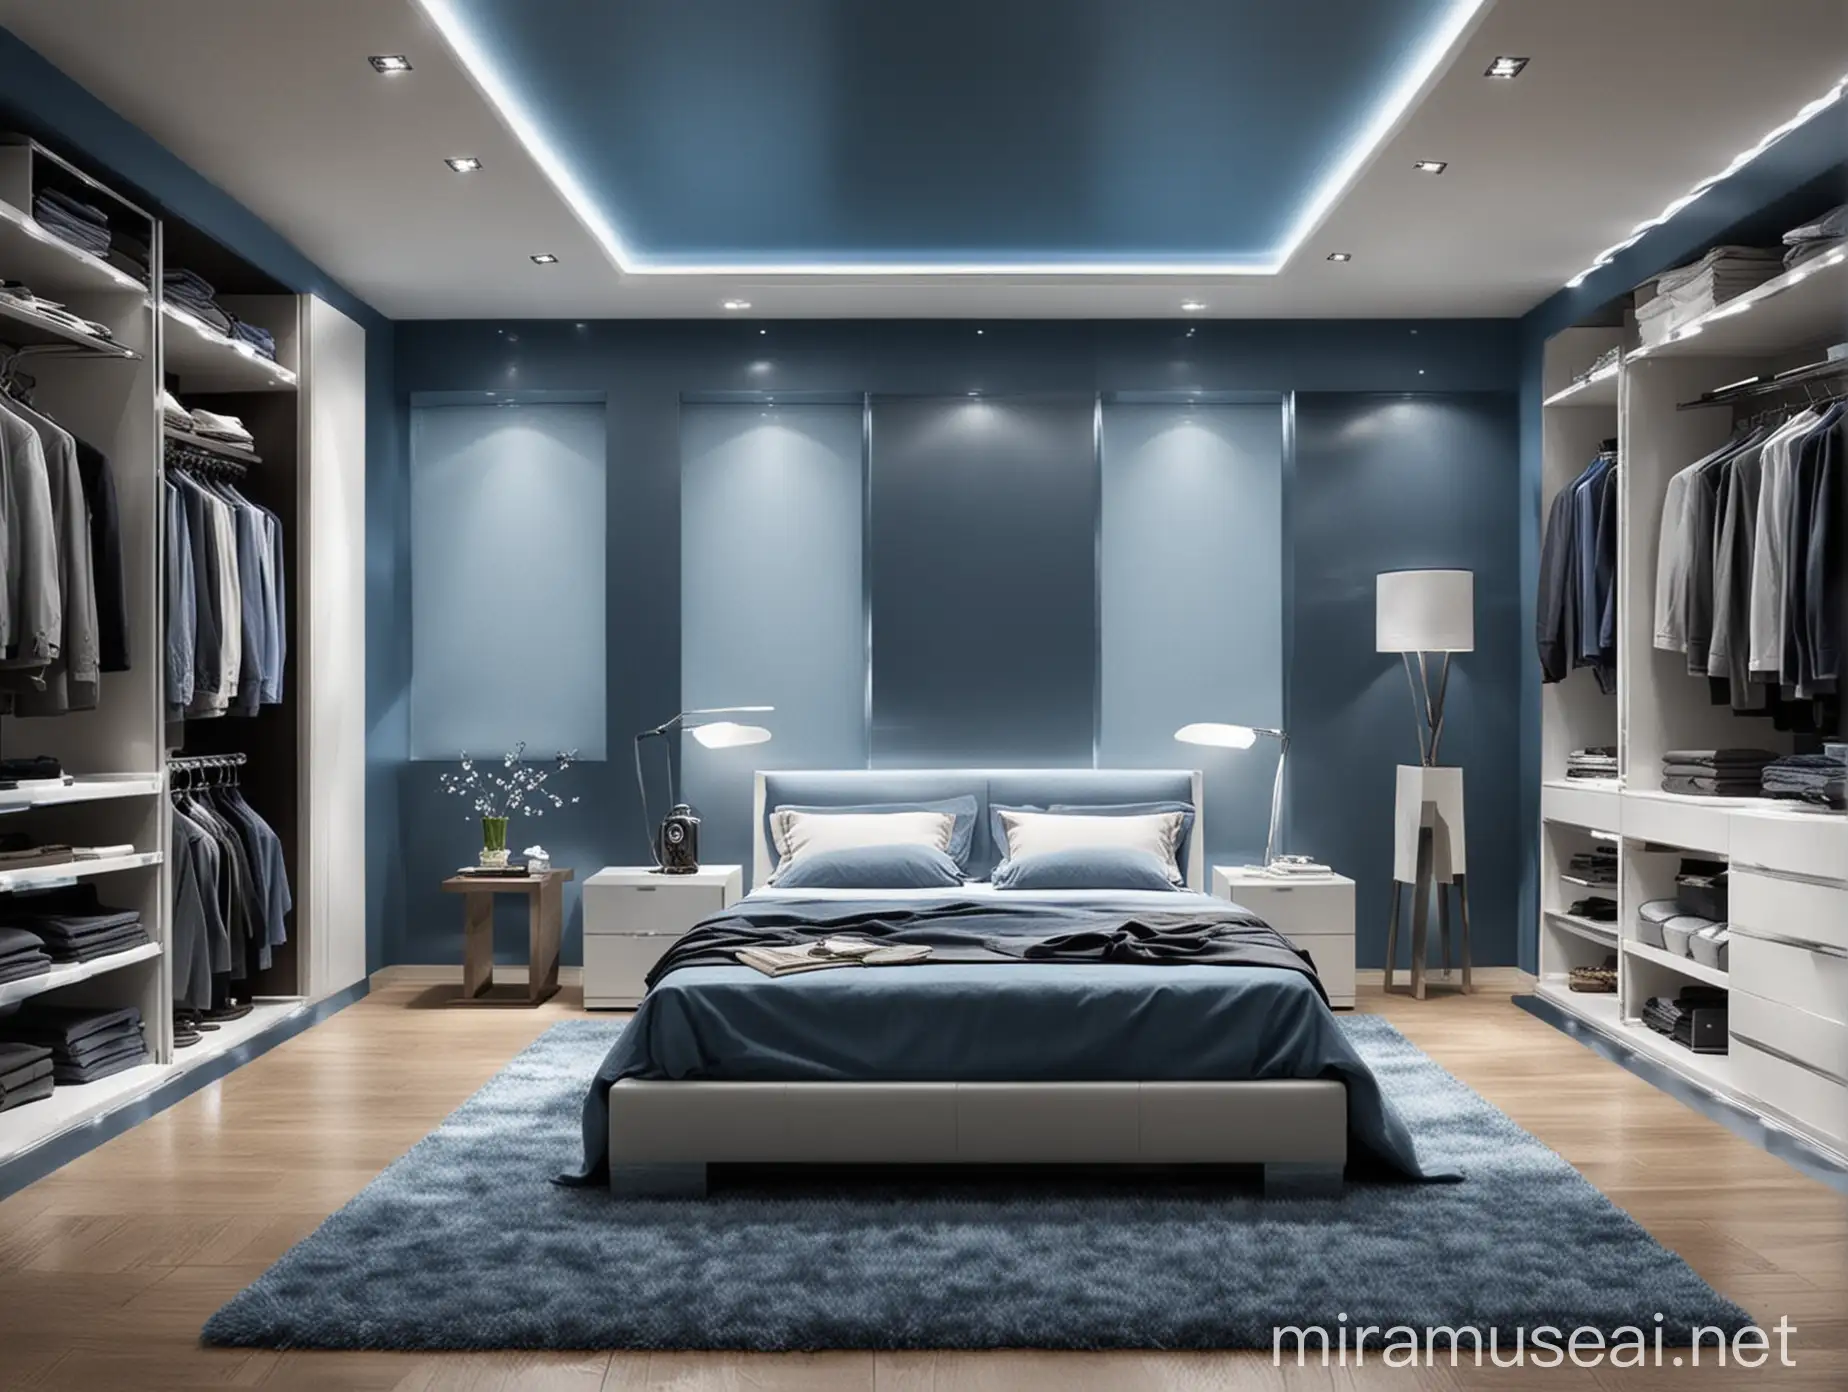 Elegant MiddleAged Man Room with Futuristic Blue and White Dcor